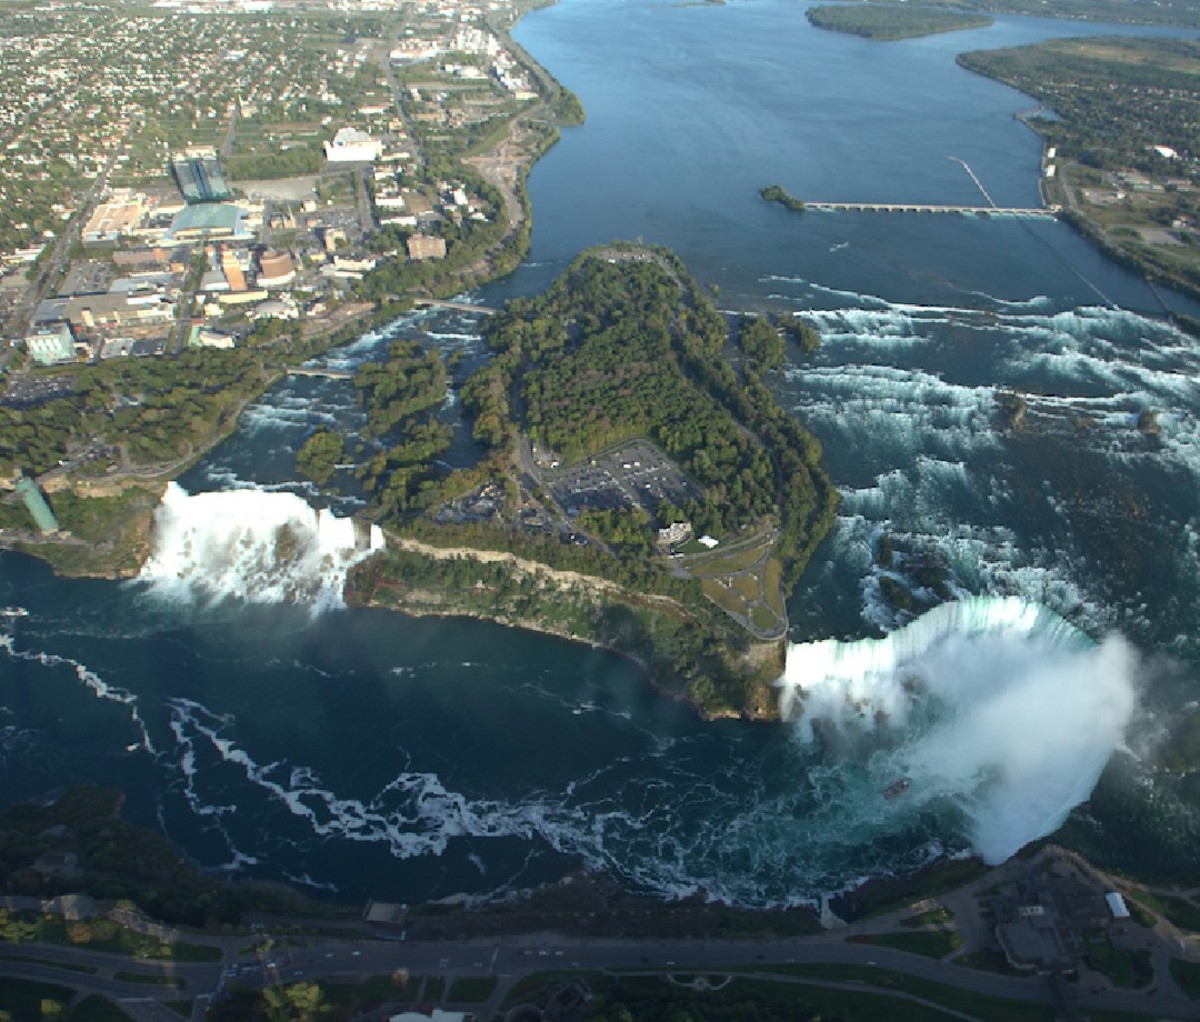 Aerial helicopter views above Niagara Falls on the U.S.-Canada border